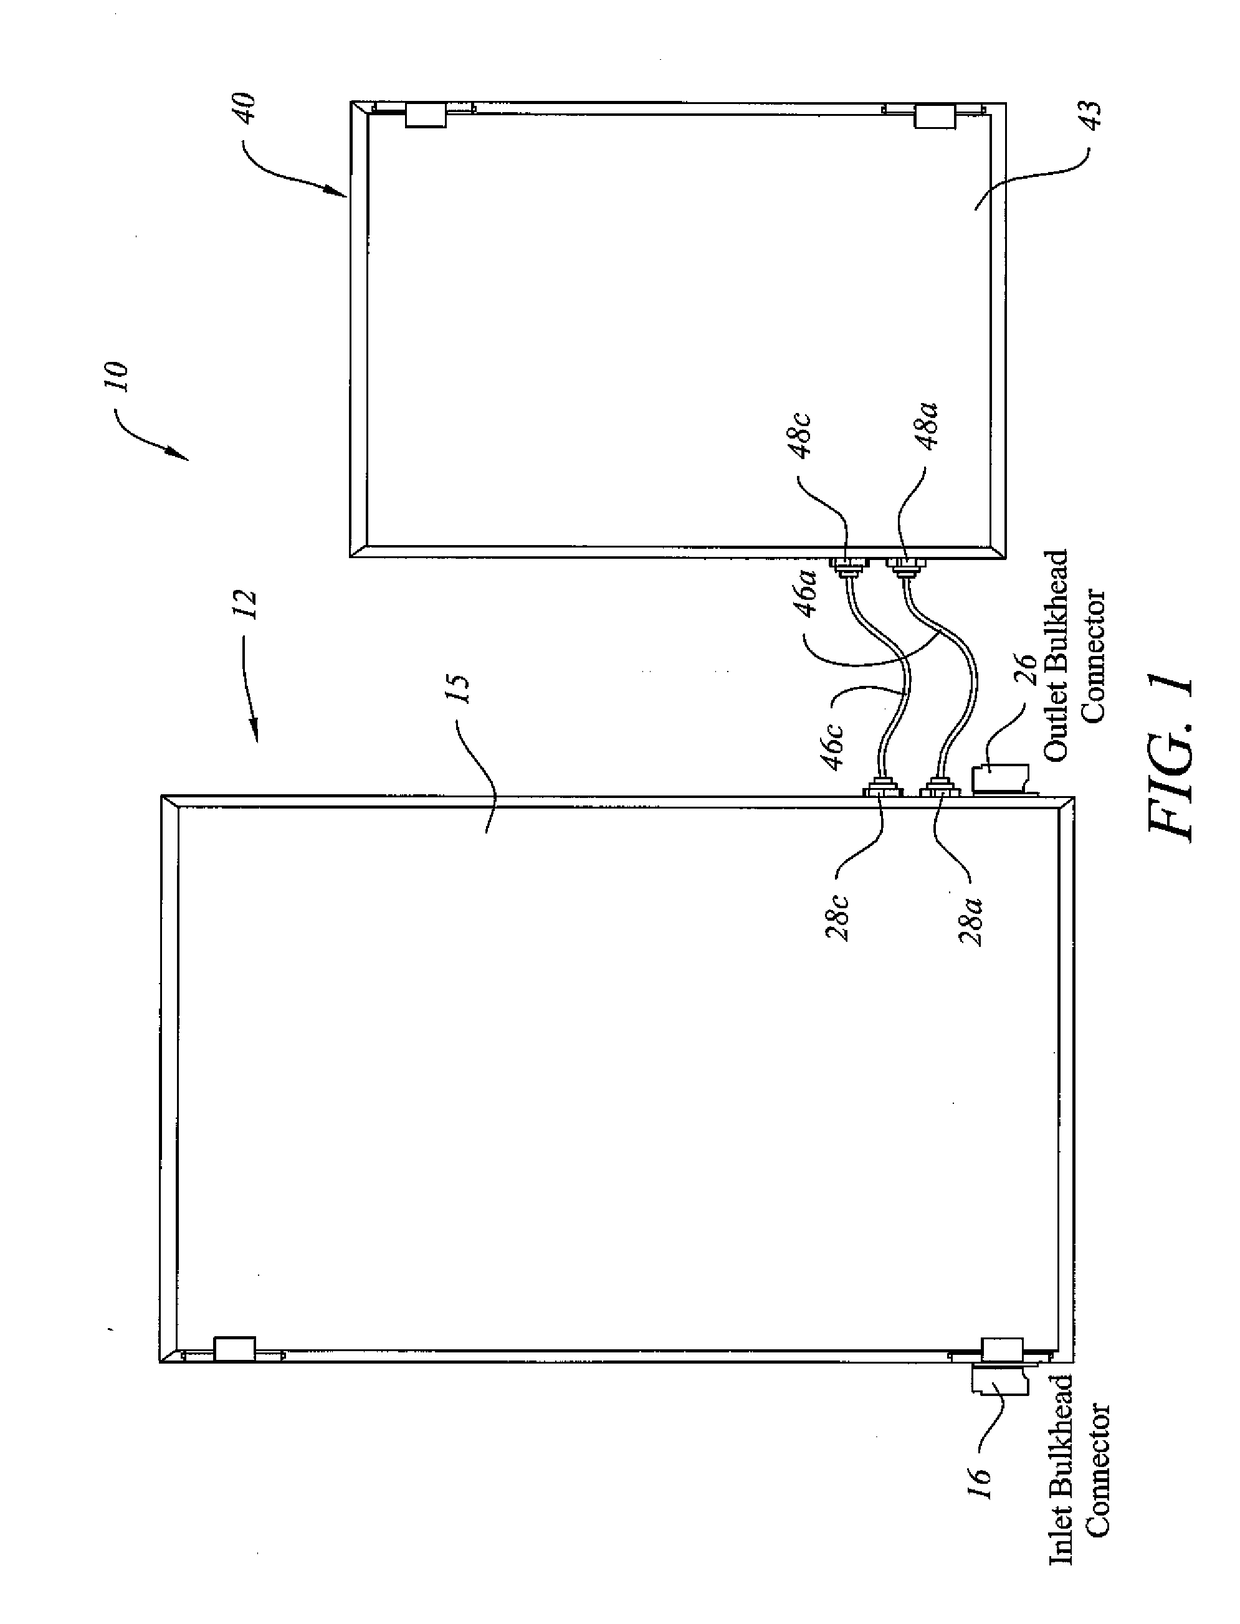 System and Method for Automated Control, Feed, Delivery Verification, and Inventory Management of Corrosion and Scale Treatment Products for Water Systems